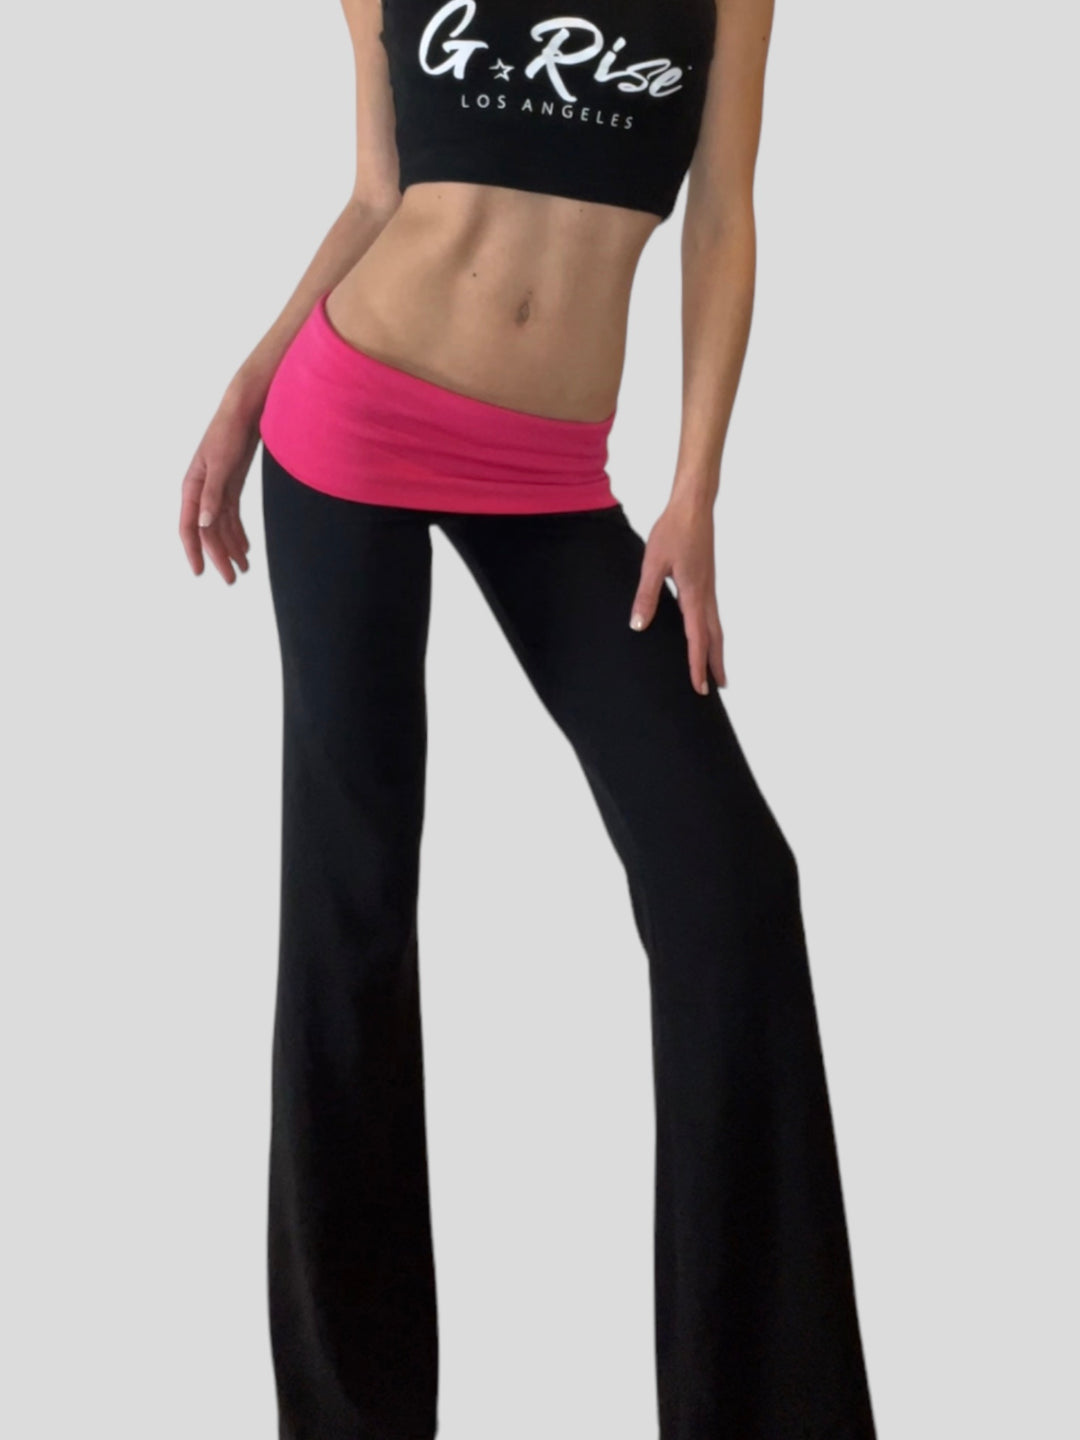 G Rise Low Rise Yoga Pants - blank hot pink – G Rise Los Angeles